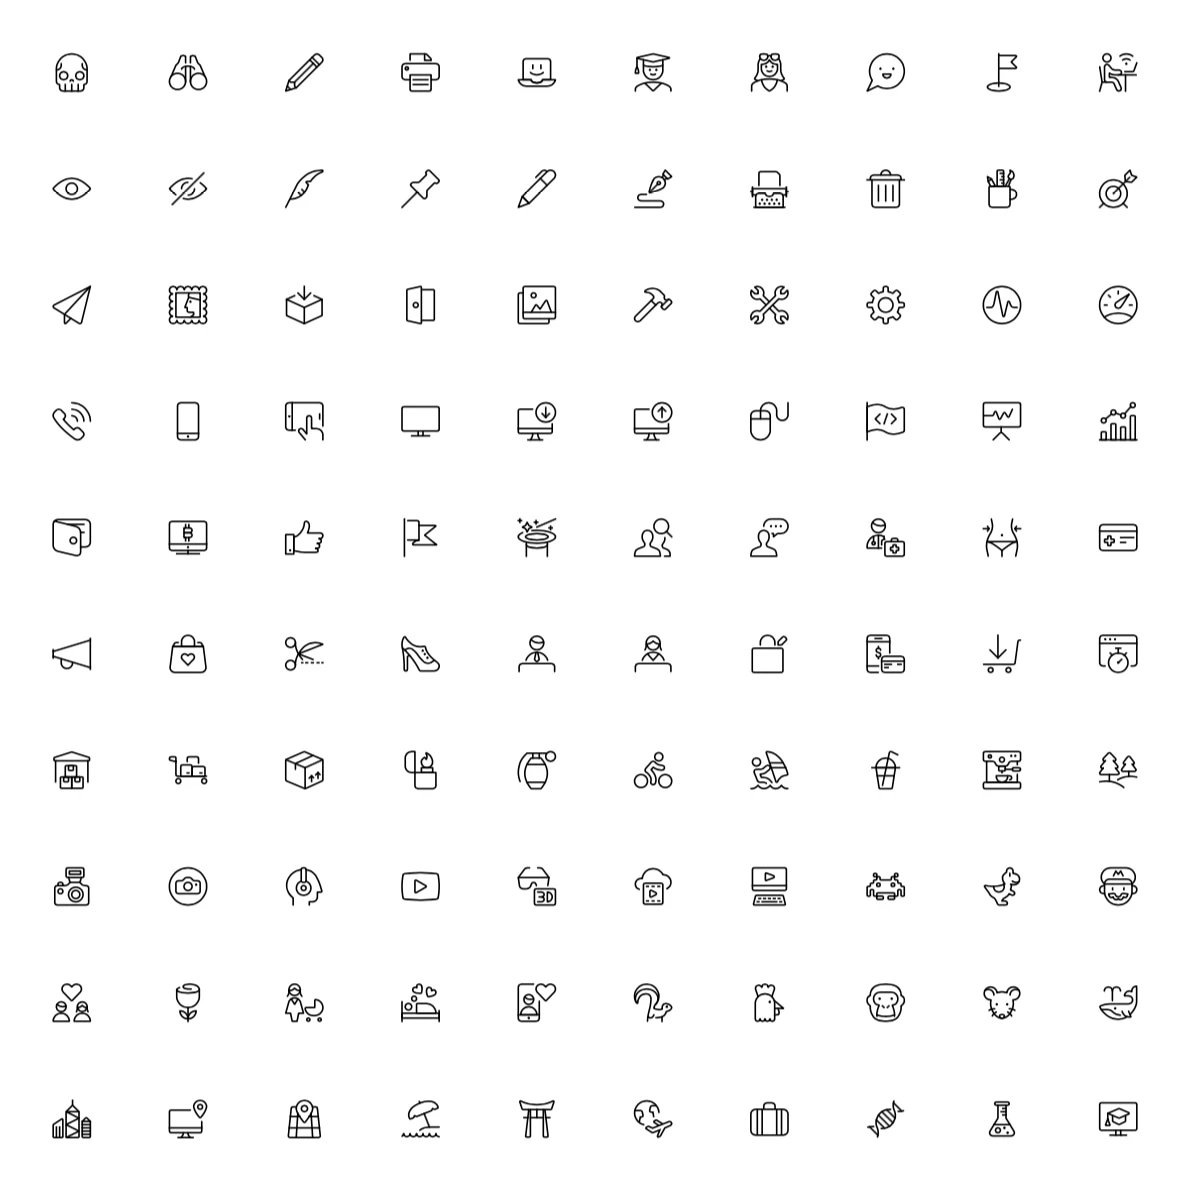 Free Streamline Icons - Streamline 3.0 is the world’s largest icon library